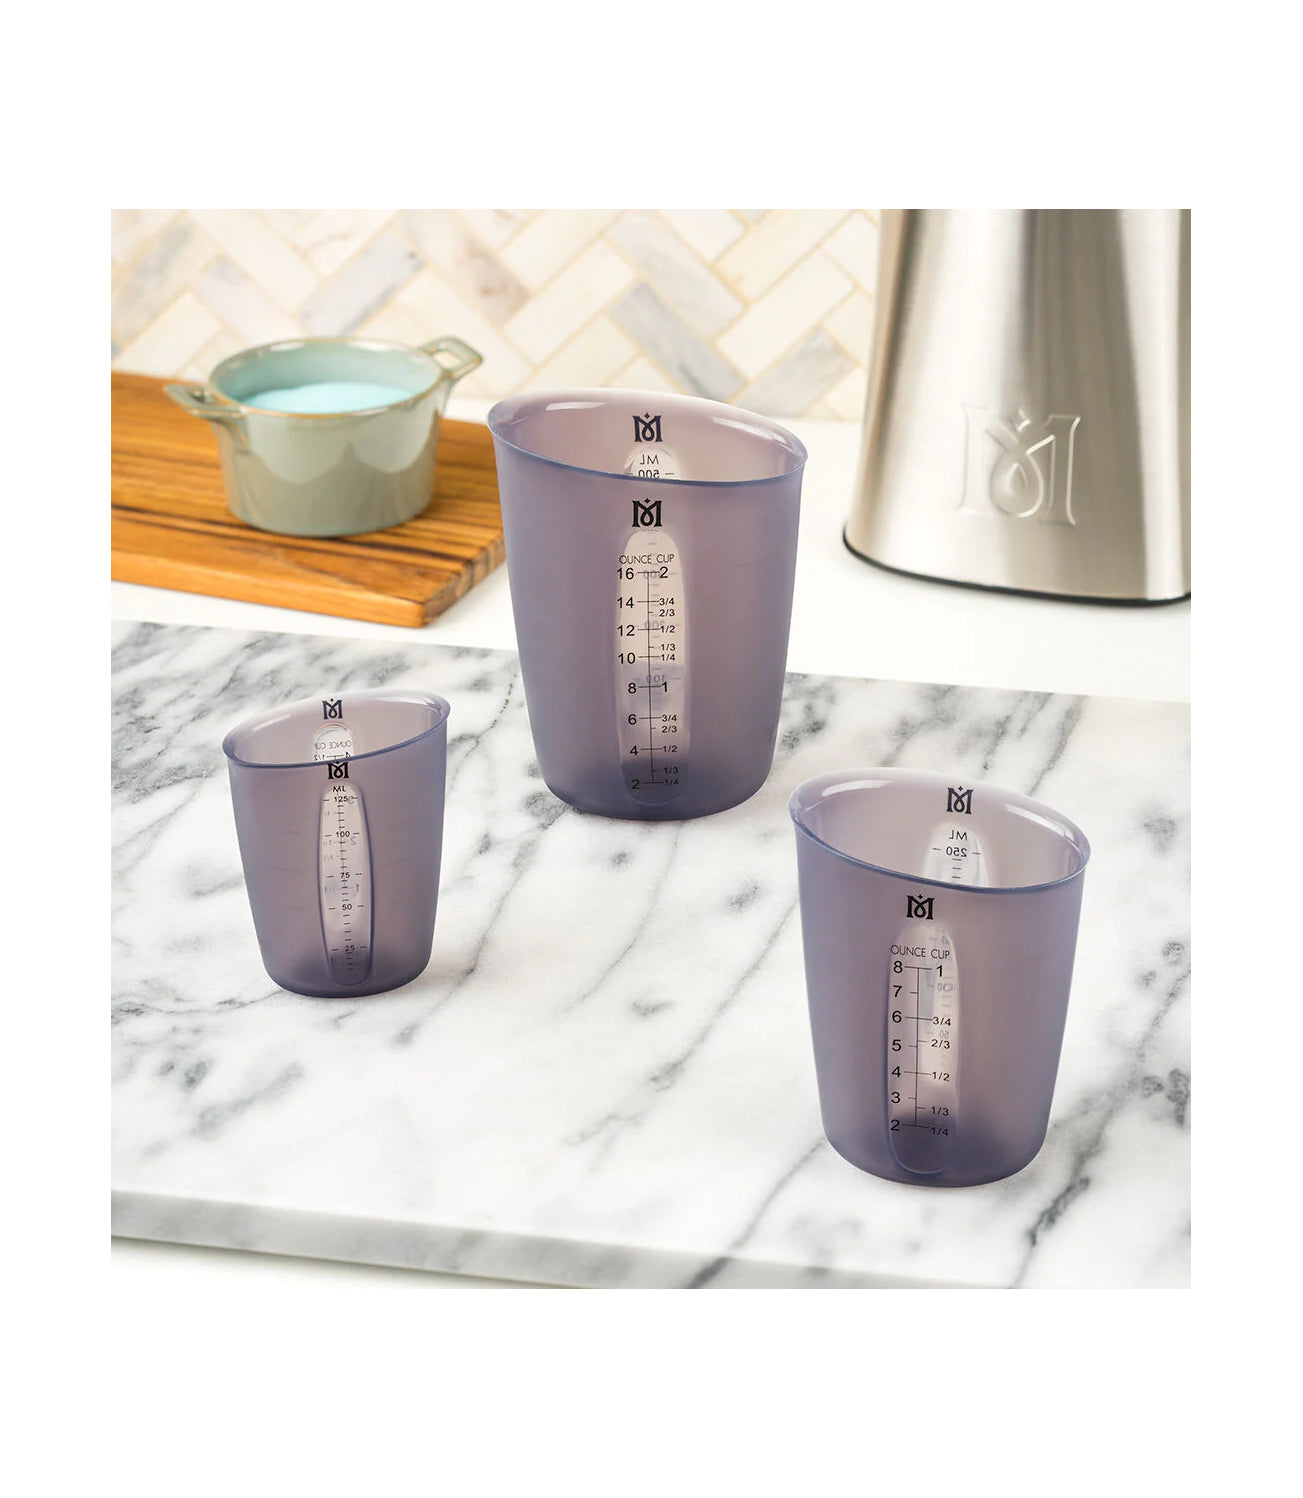 Magical Measuring Cups 3 pc 100% Pure Silicone